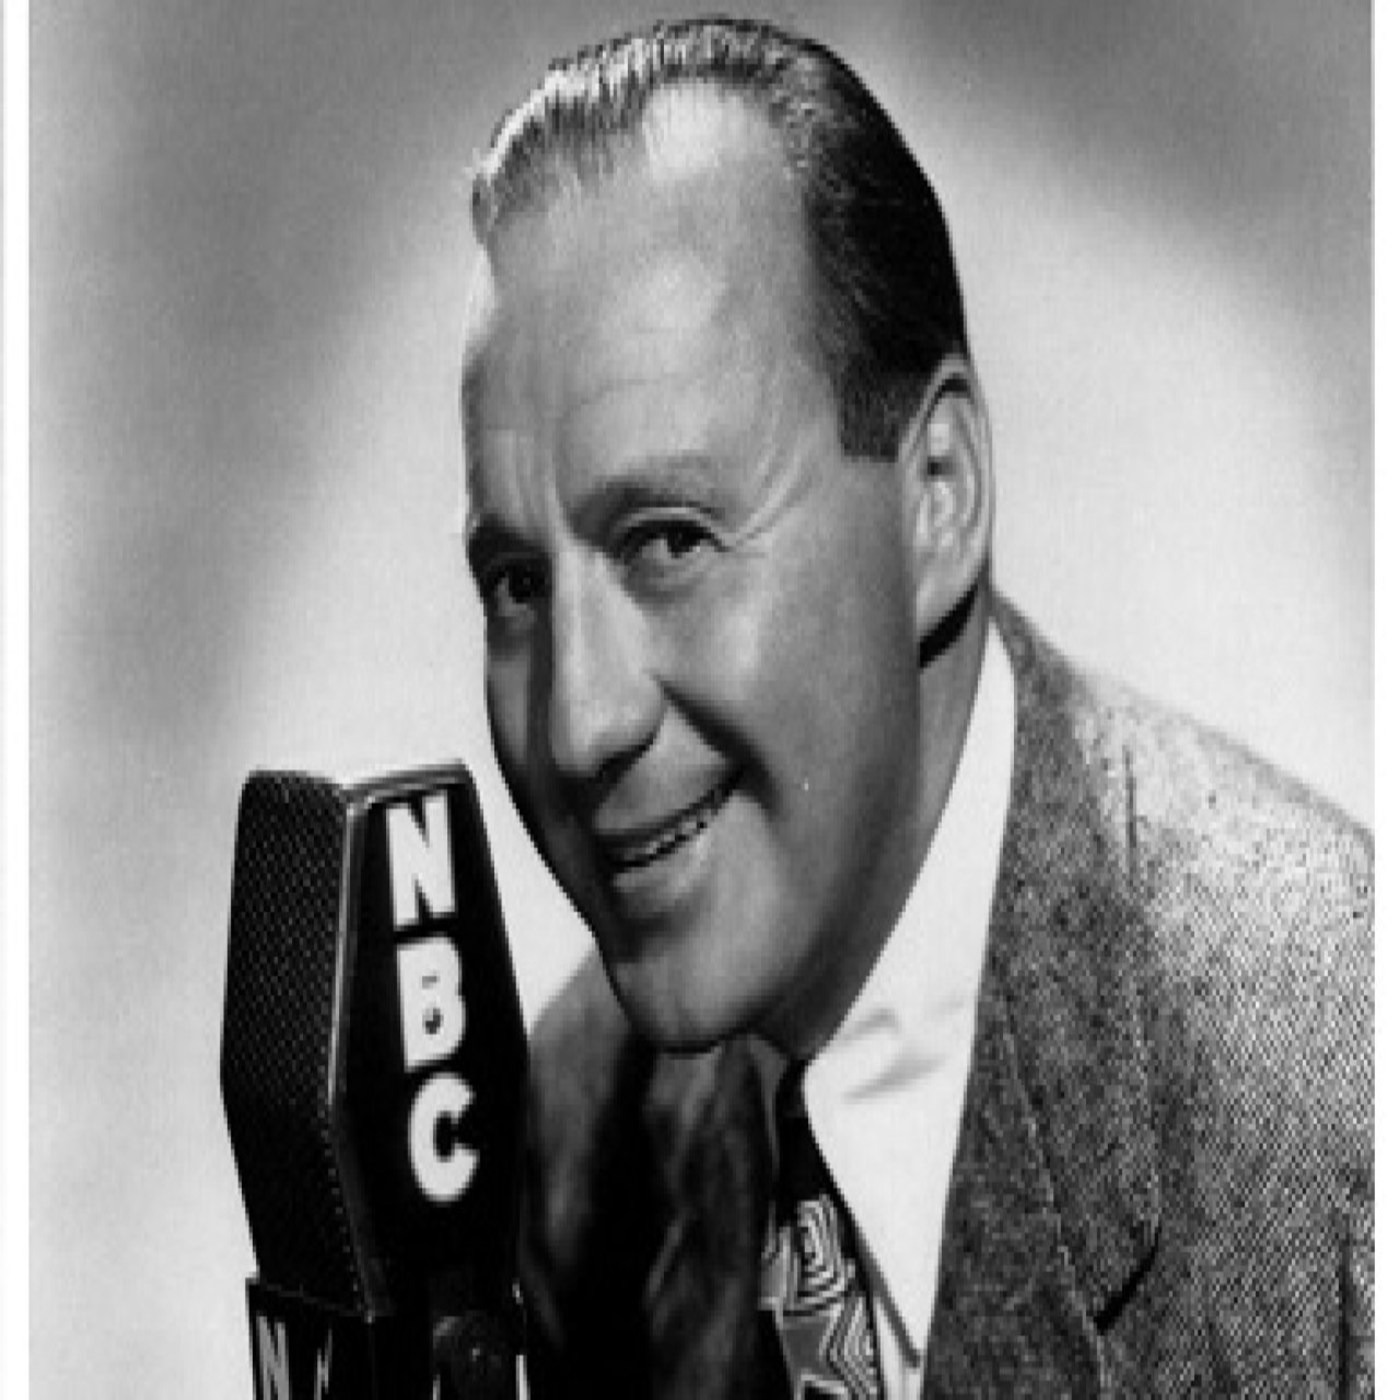 Jack Benny 53-05-31 (849) Jack Listens to the Indy 500 on the Radio